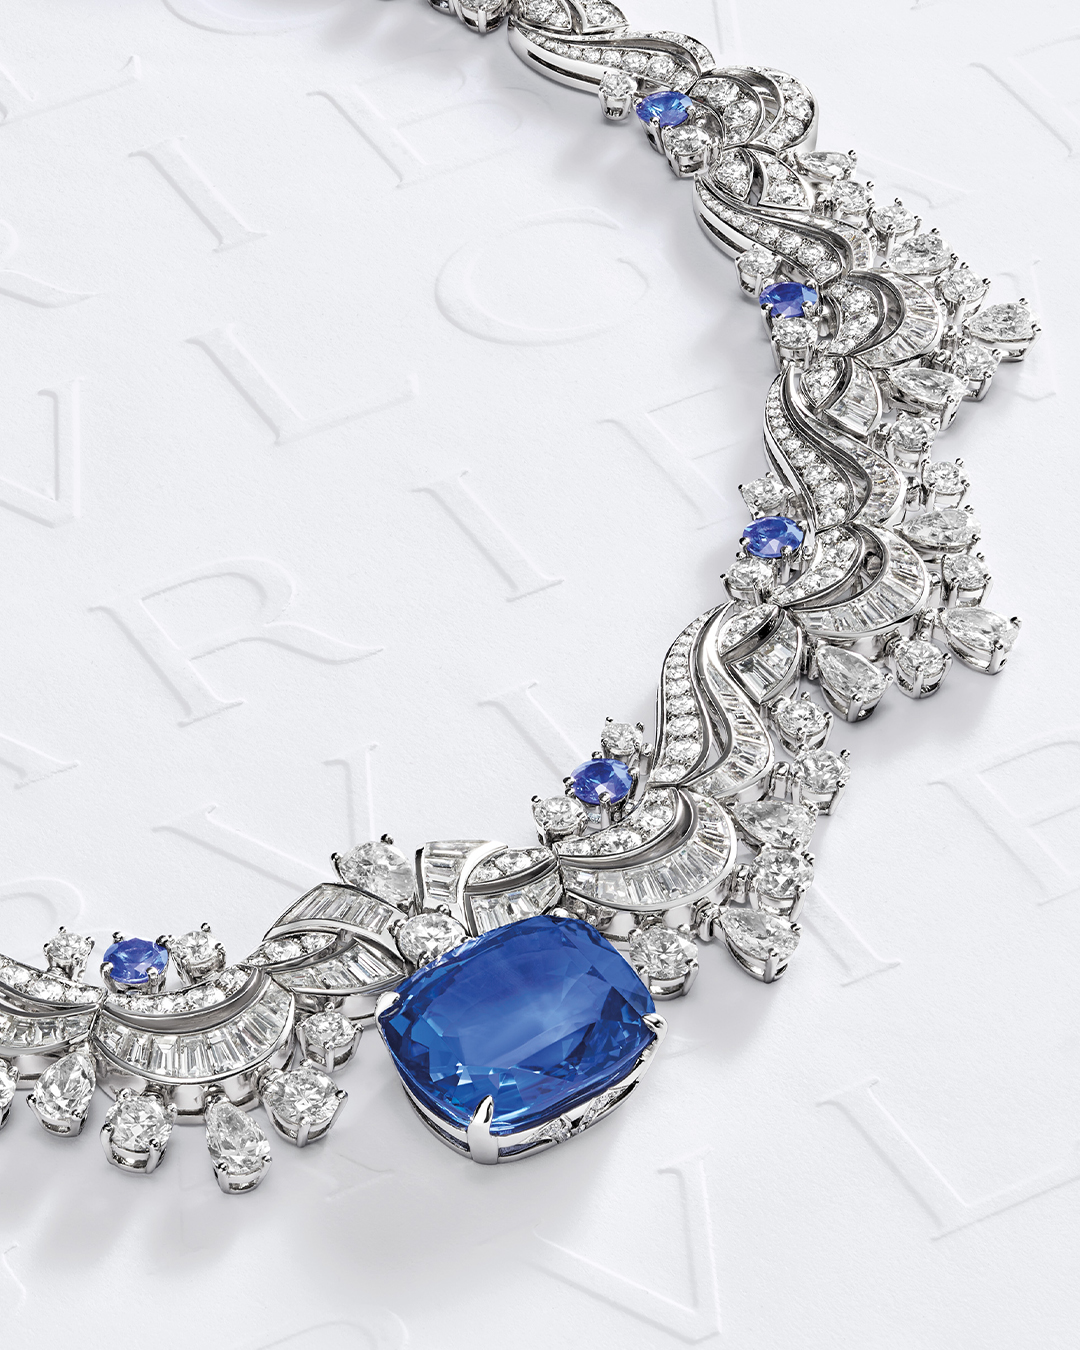 Bulgari on X: The Ocean Wave High Jewelry necklace features an